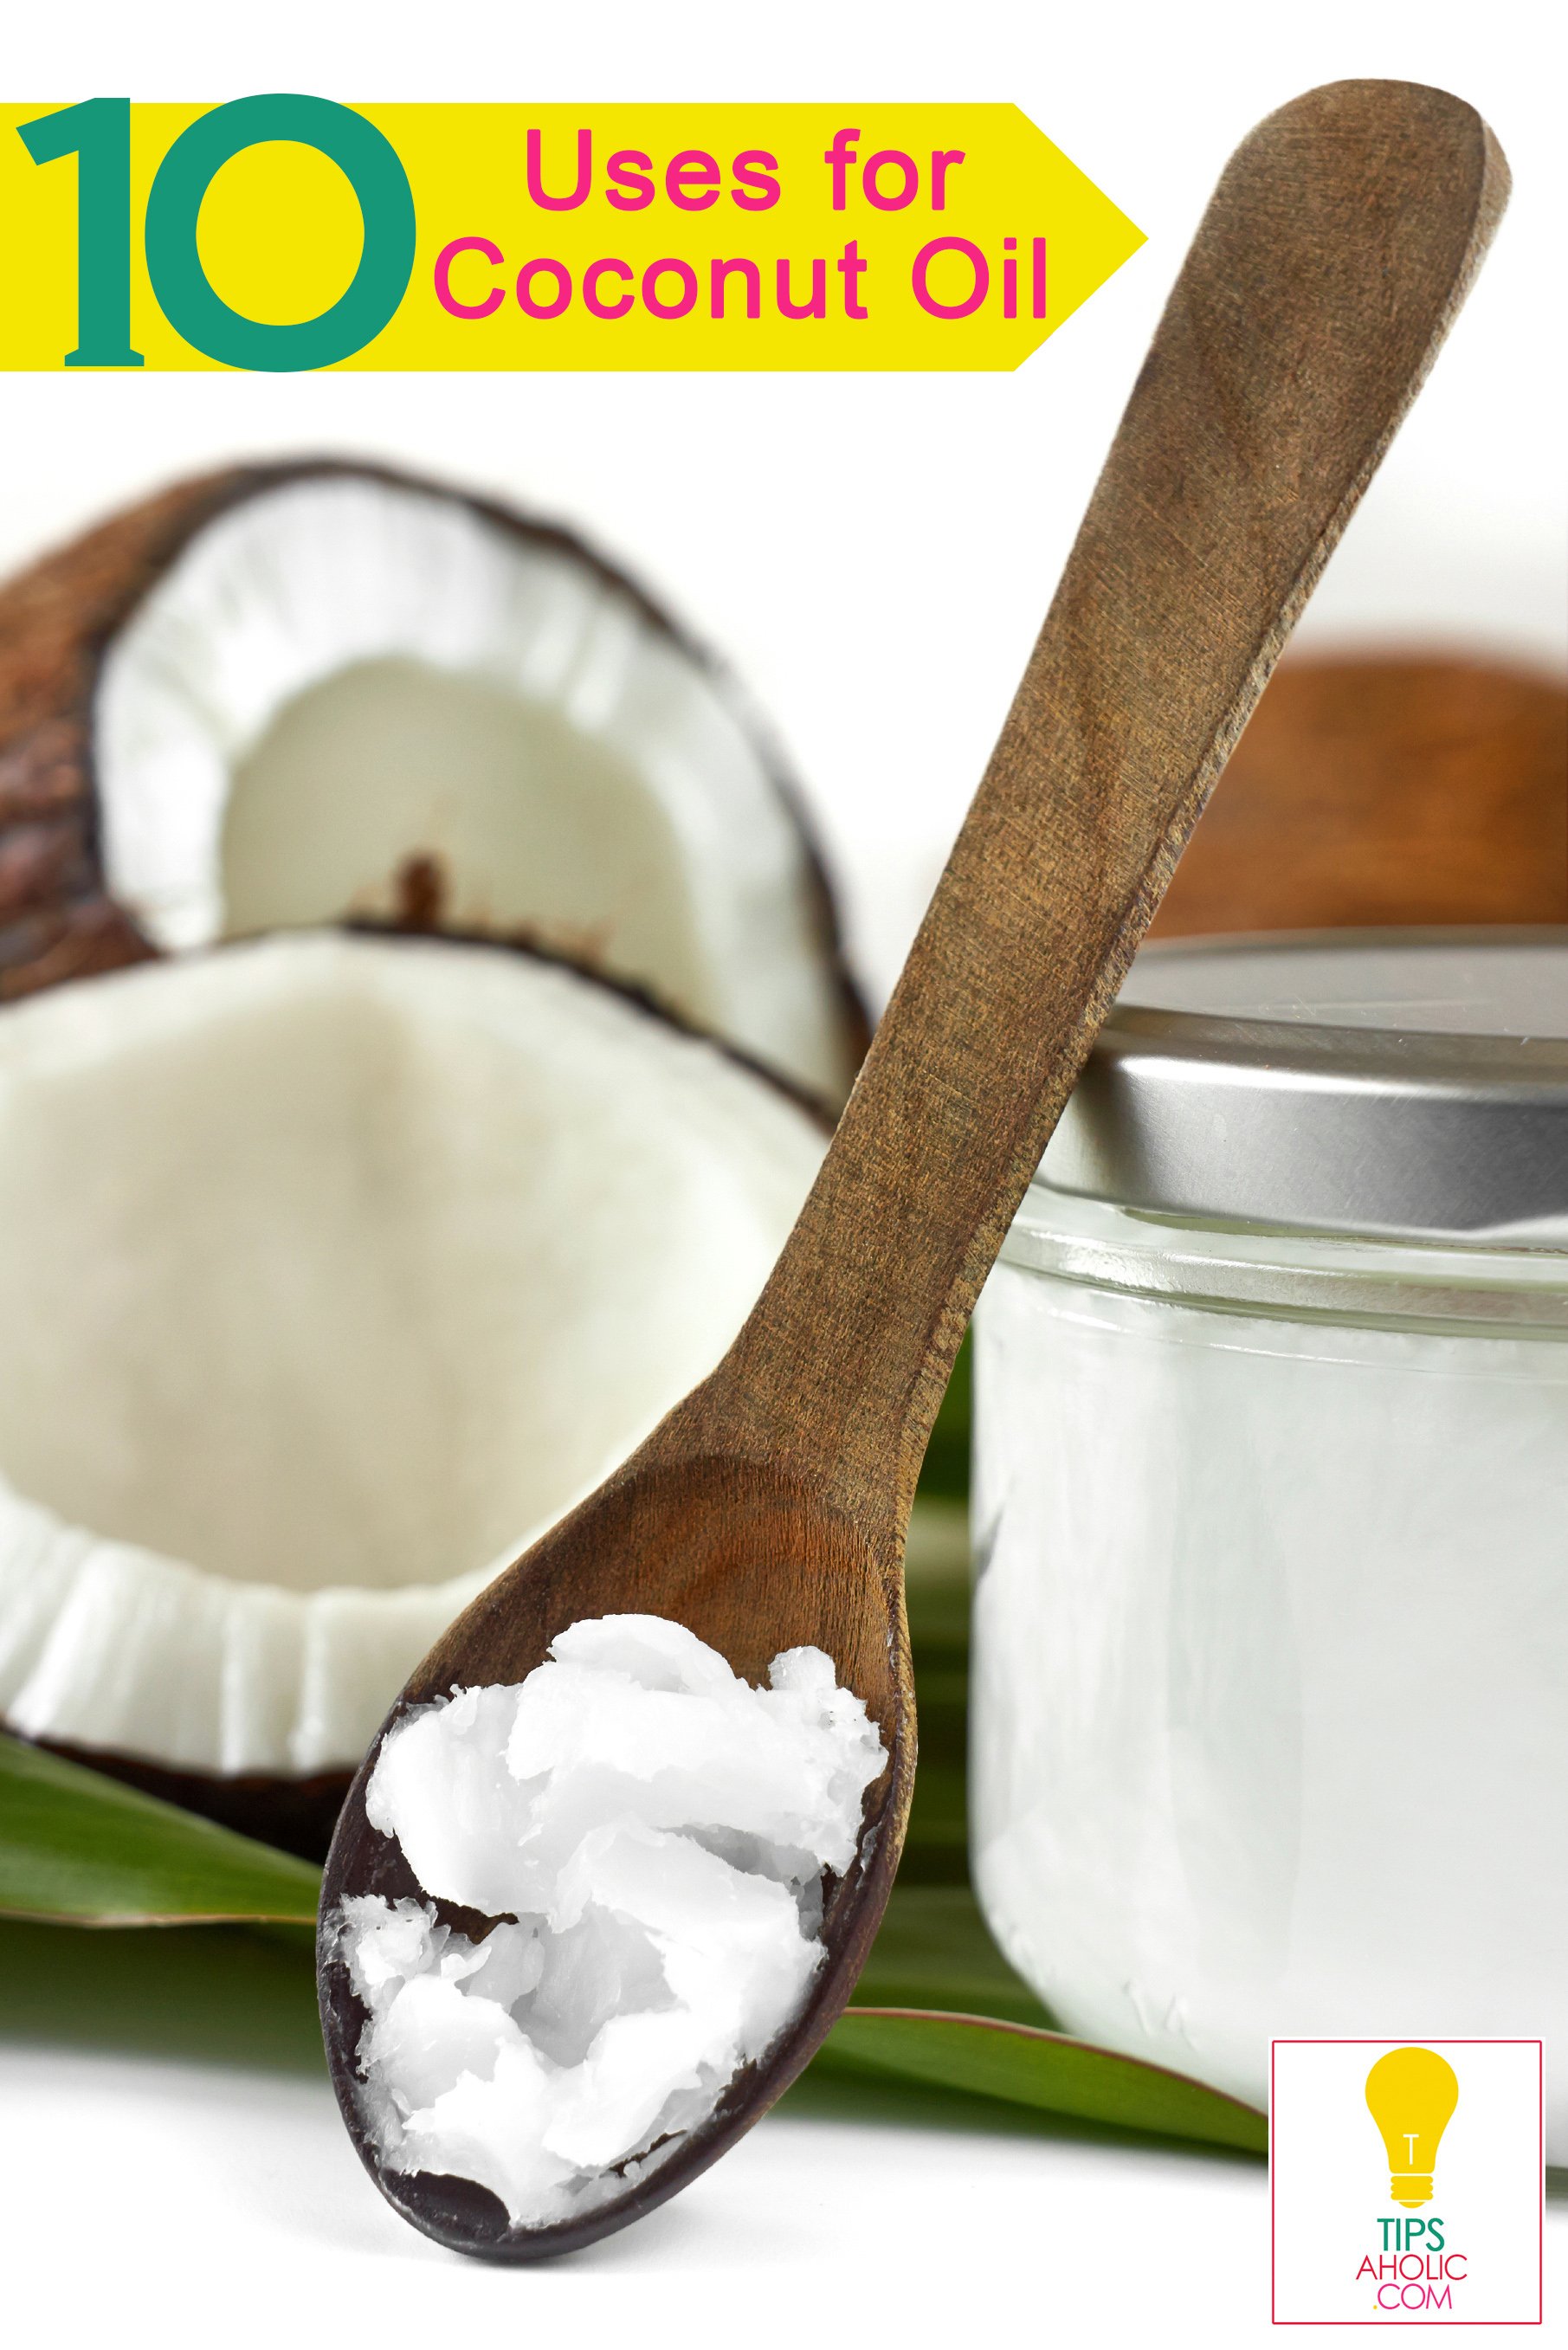 10 Ways to Use Coconut Oil